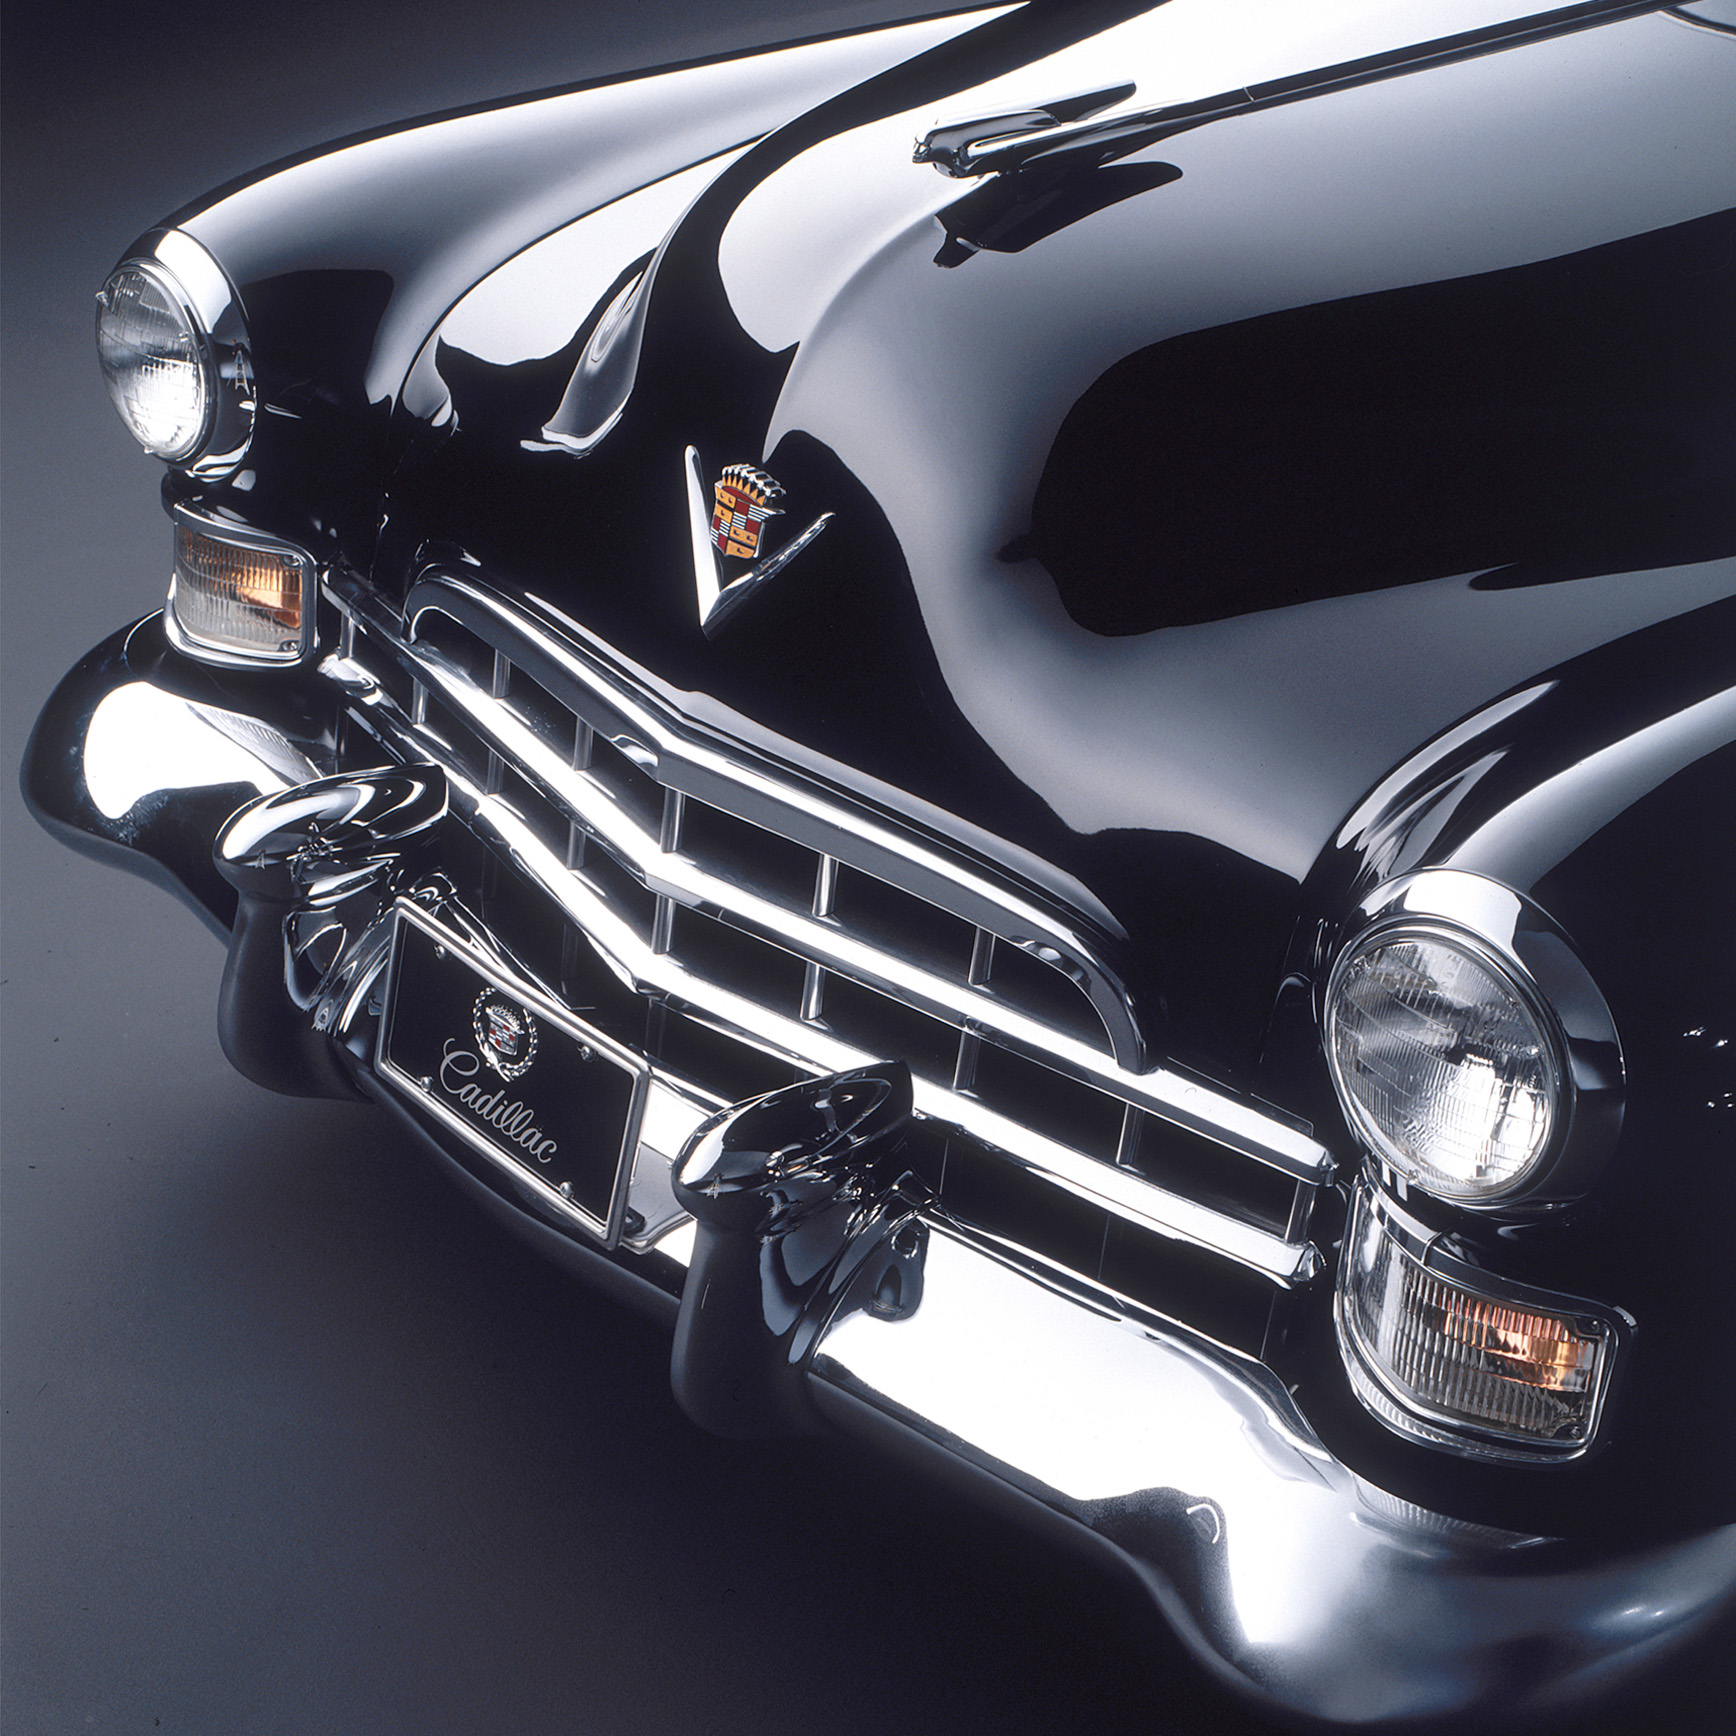 Should Cadillac go back to the traditional hood ornament? 